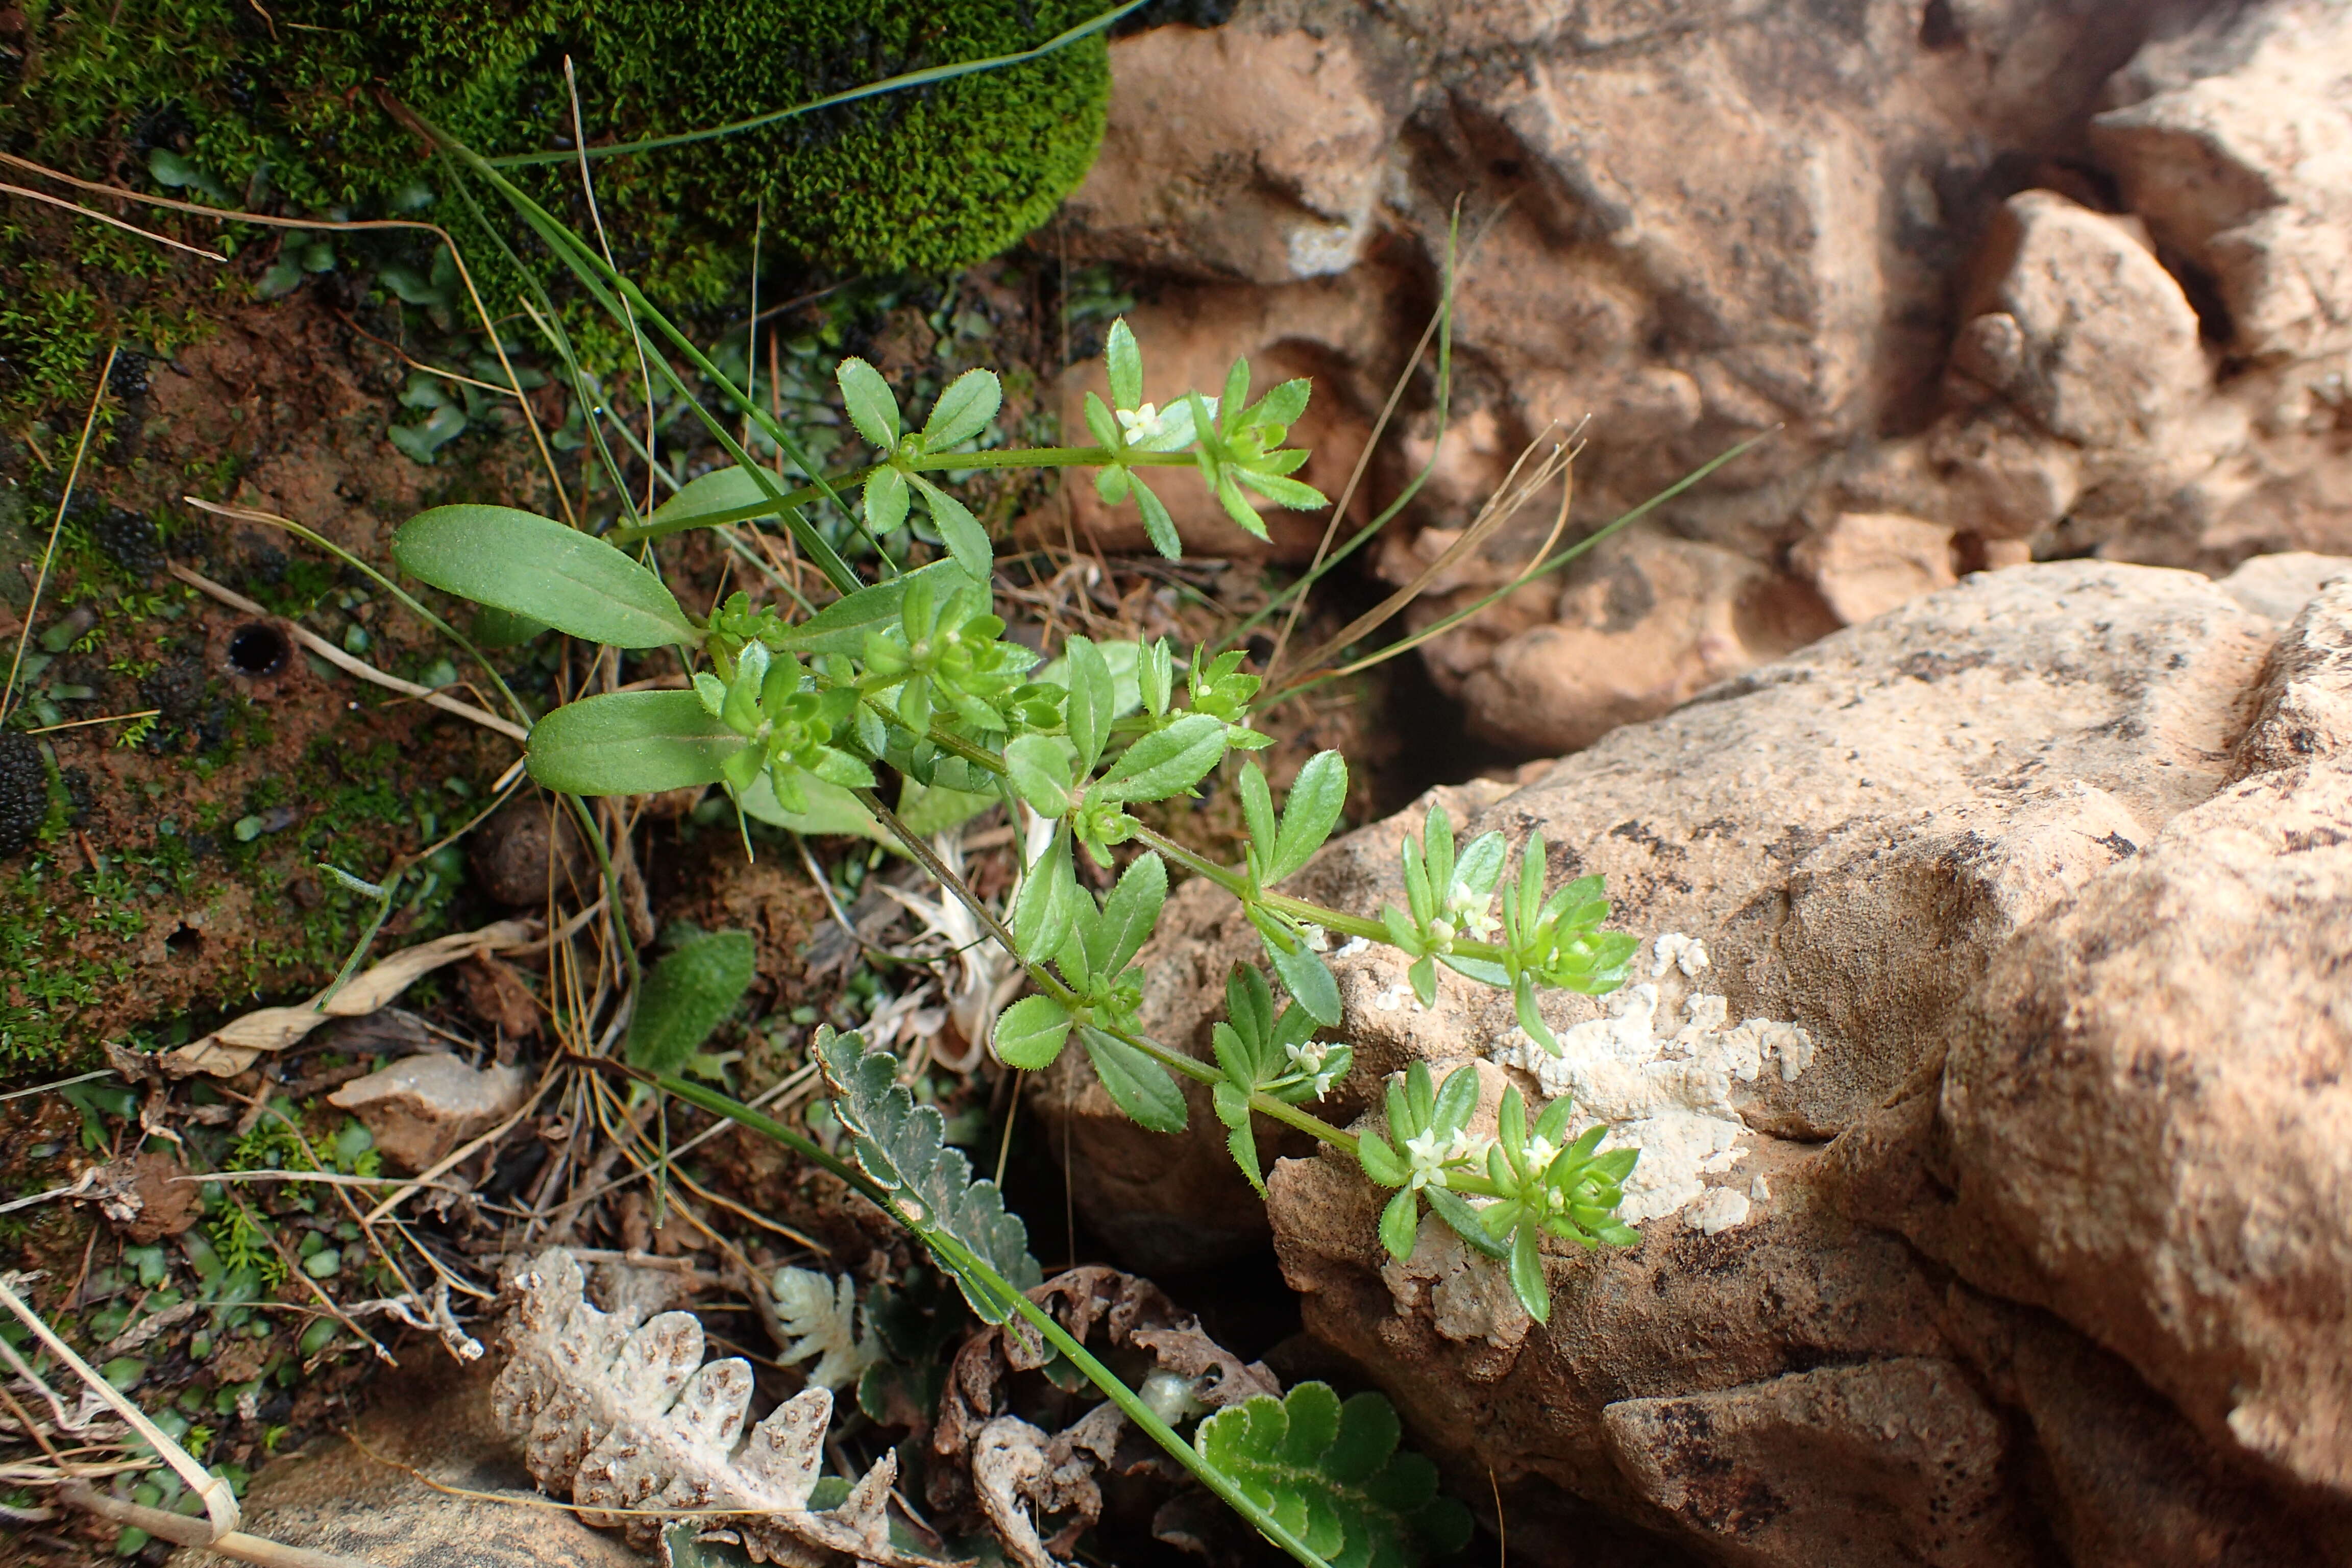 Image of warty bedstraw